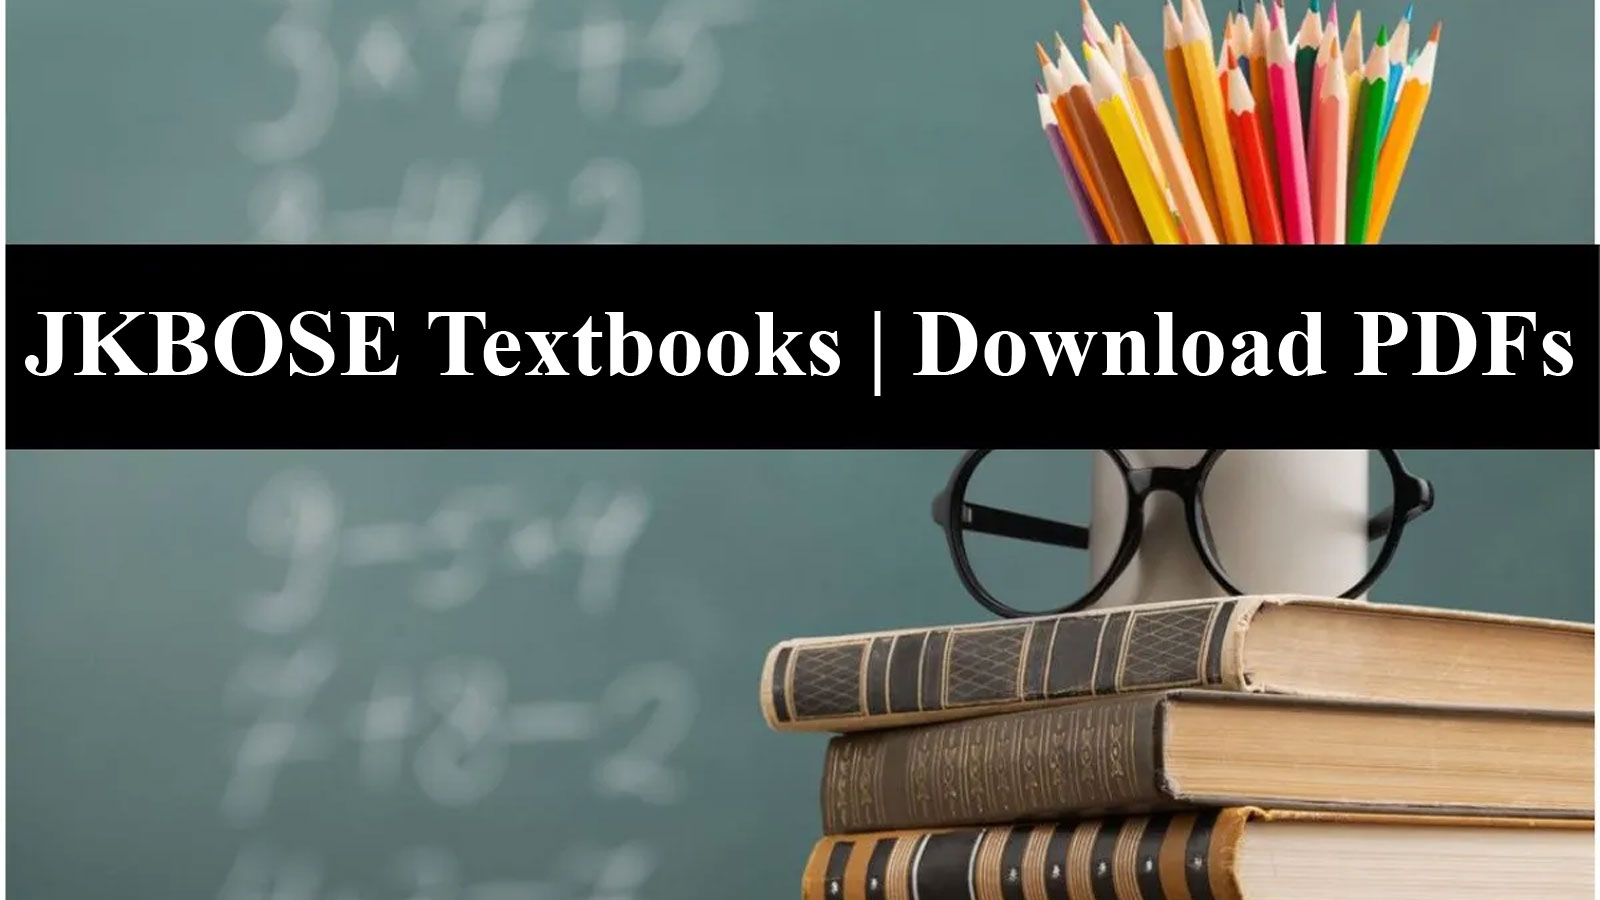 JKBOSE Class 3rd Textbooks; Direct Link to Download PDFs